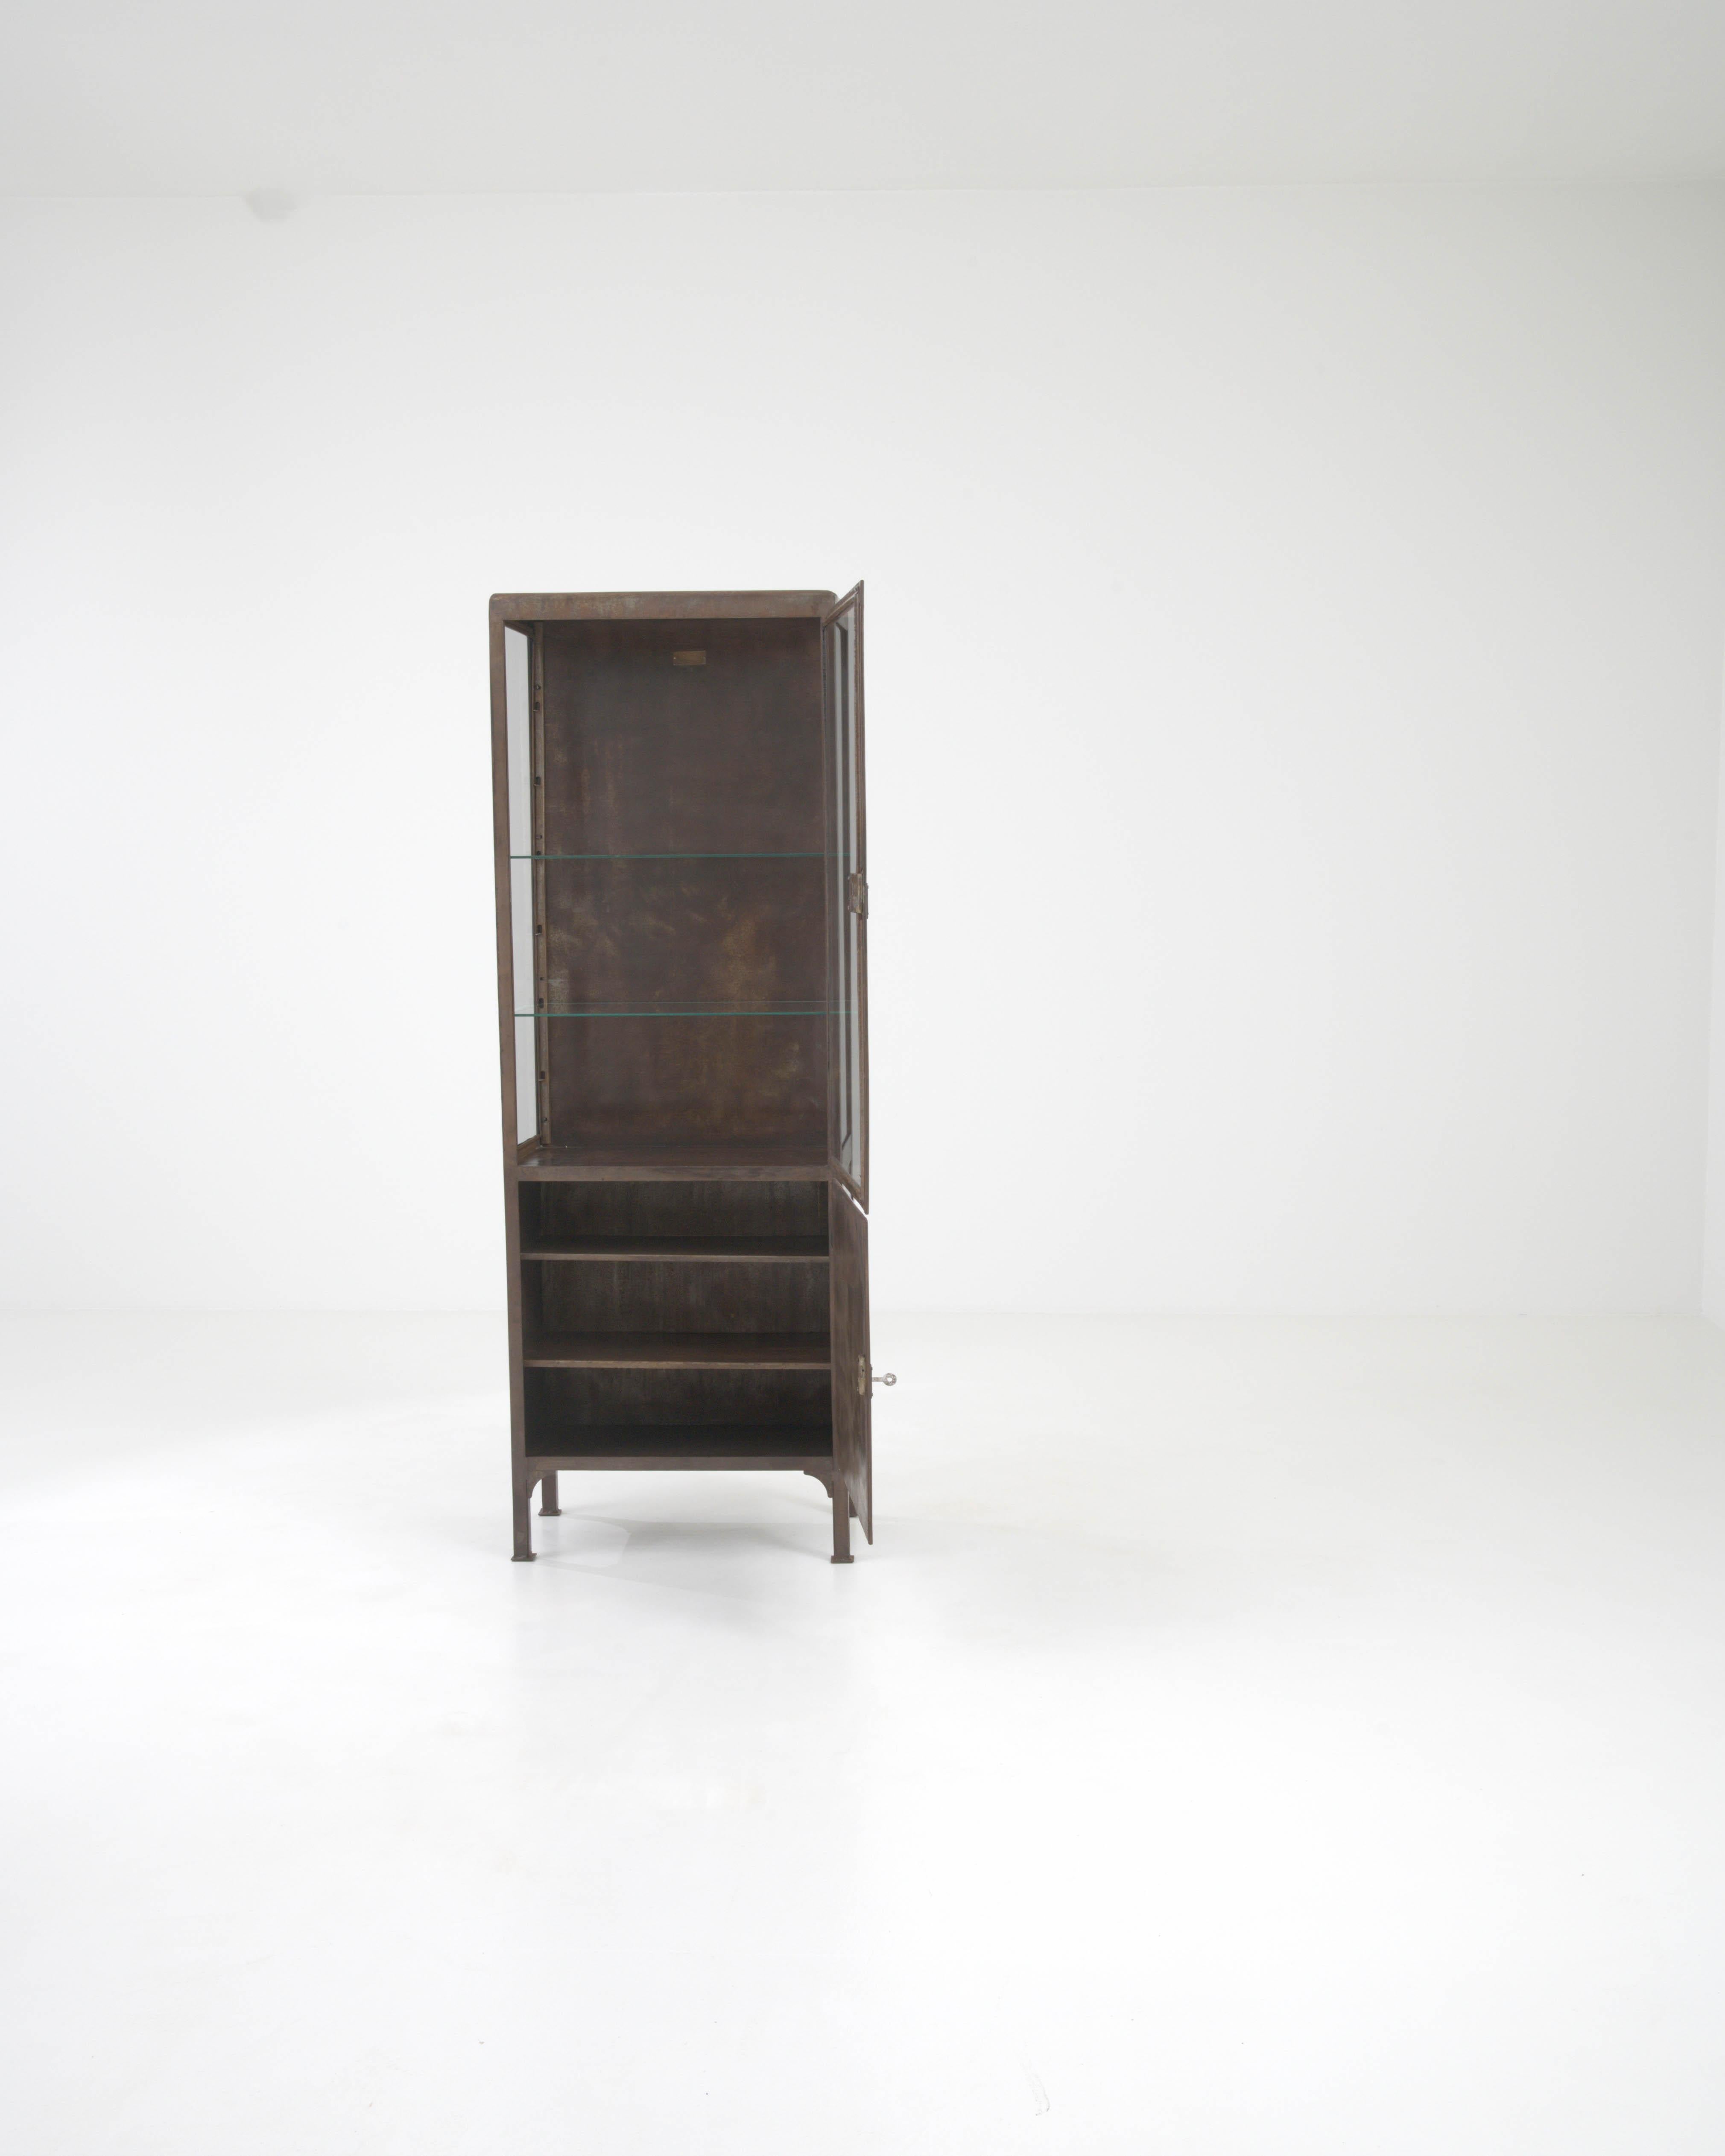 Step into the past with this authentic 20th Century Central European Metal Vitrine, a treasure trove for collectors and interior design aficionados alike. Crafted with precision, this slim, upright cabinet pairs the industrial charm of its dark